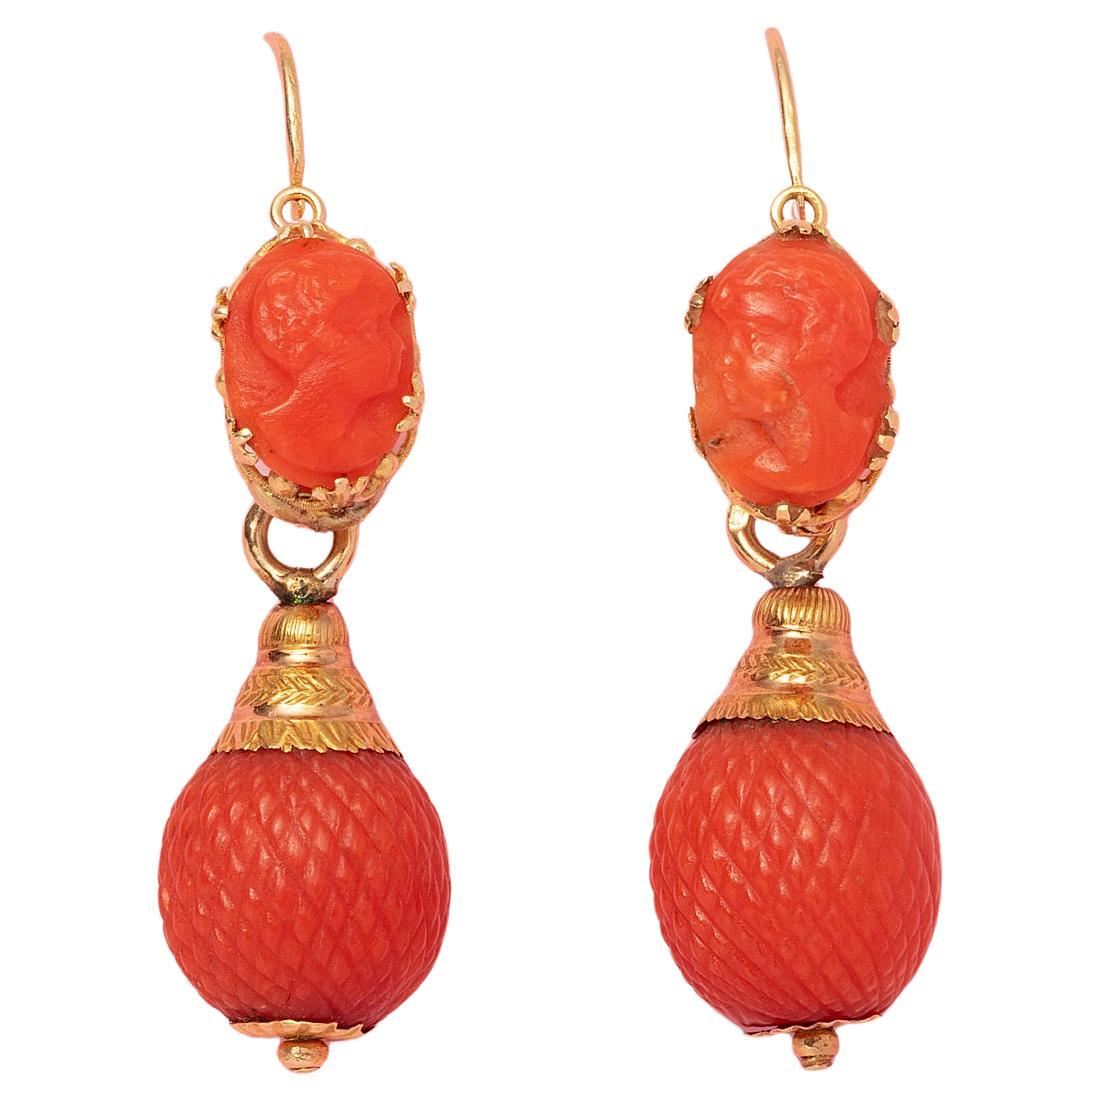 A Pair of 18 Carat Gold and Coral Gergian Day and Night Earrings